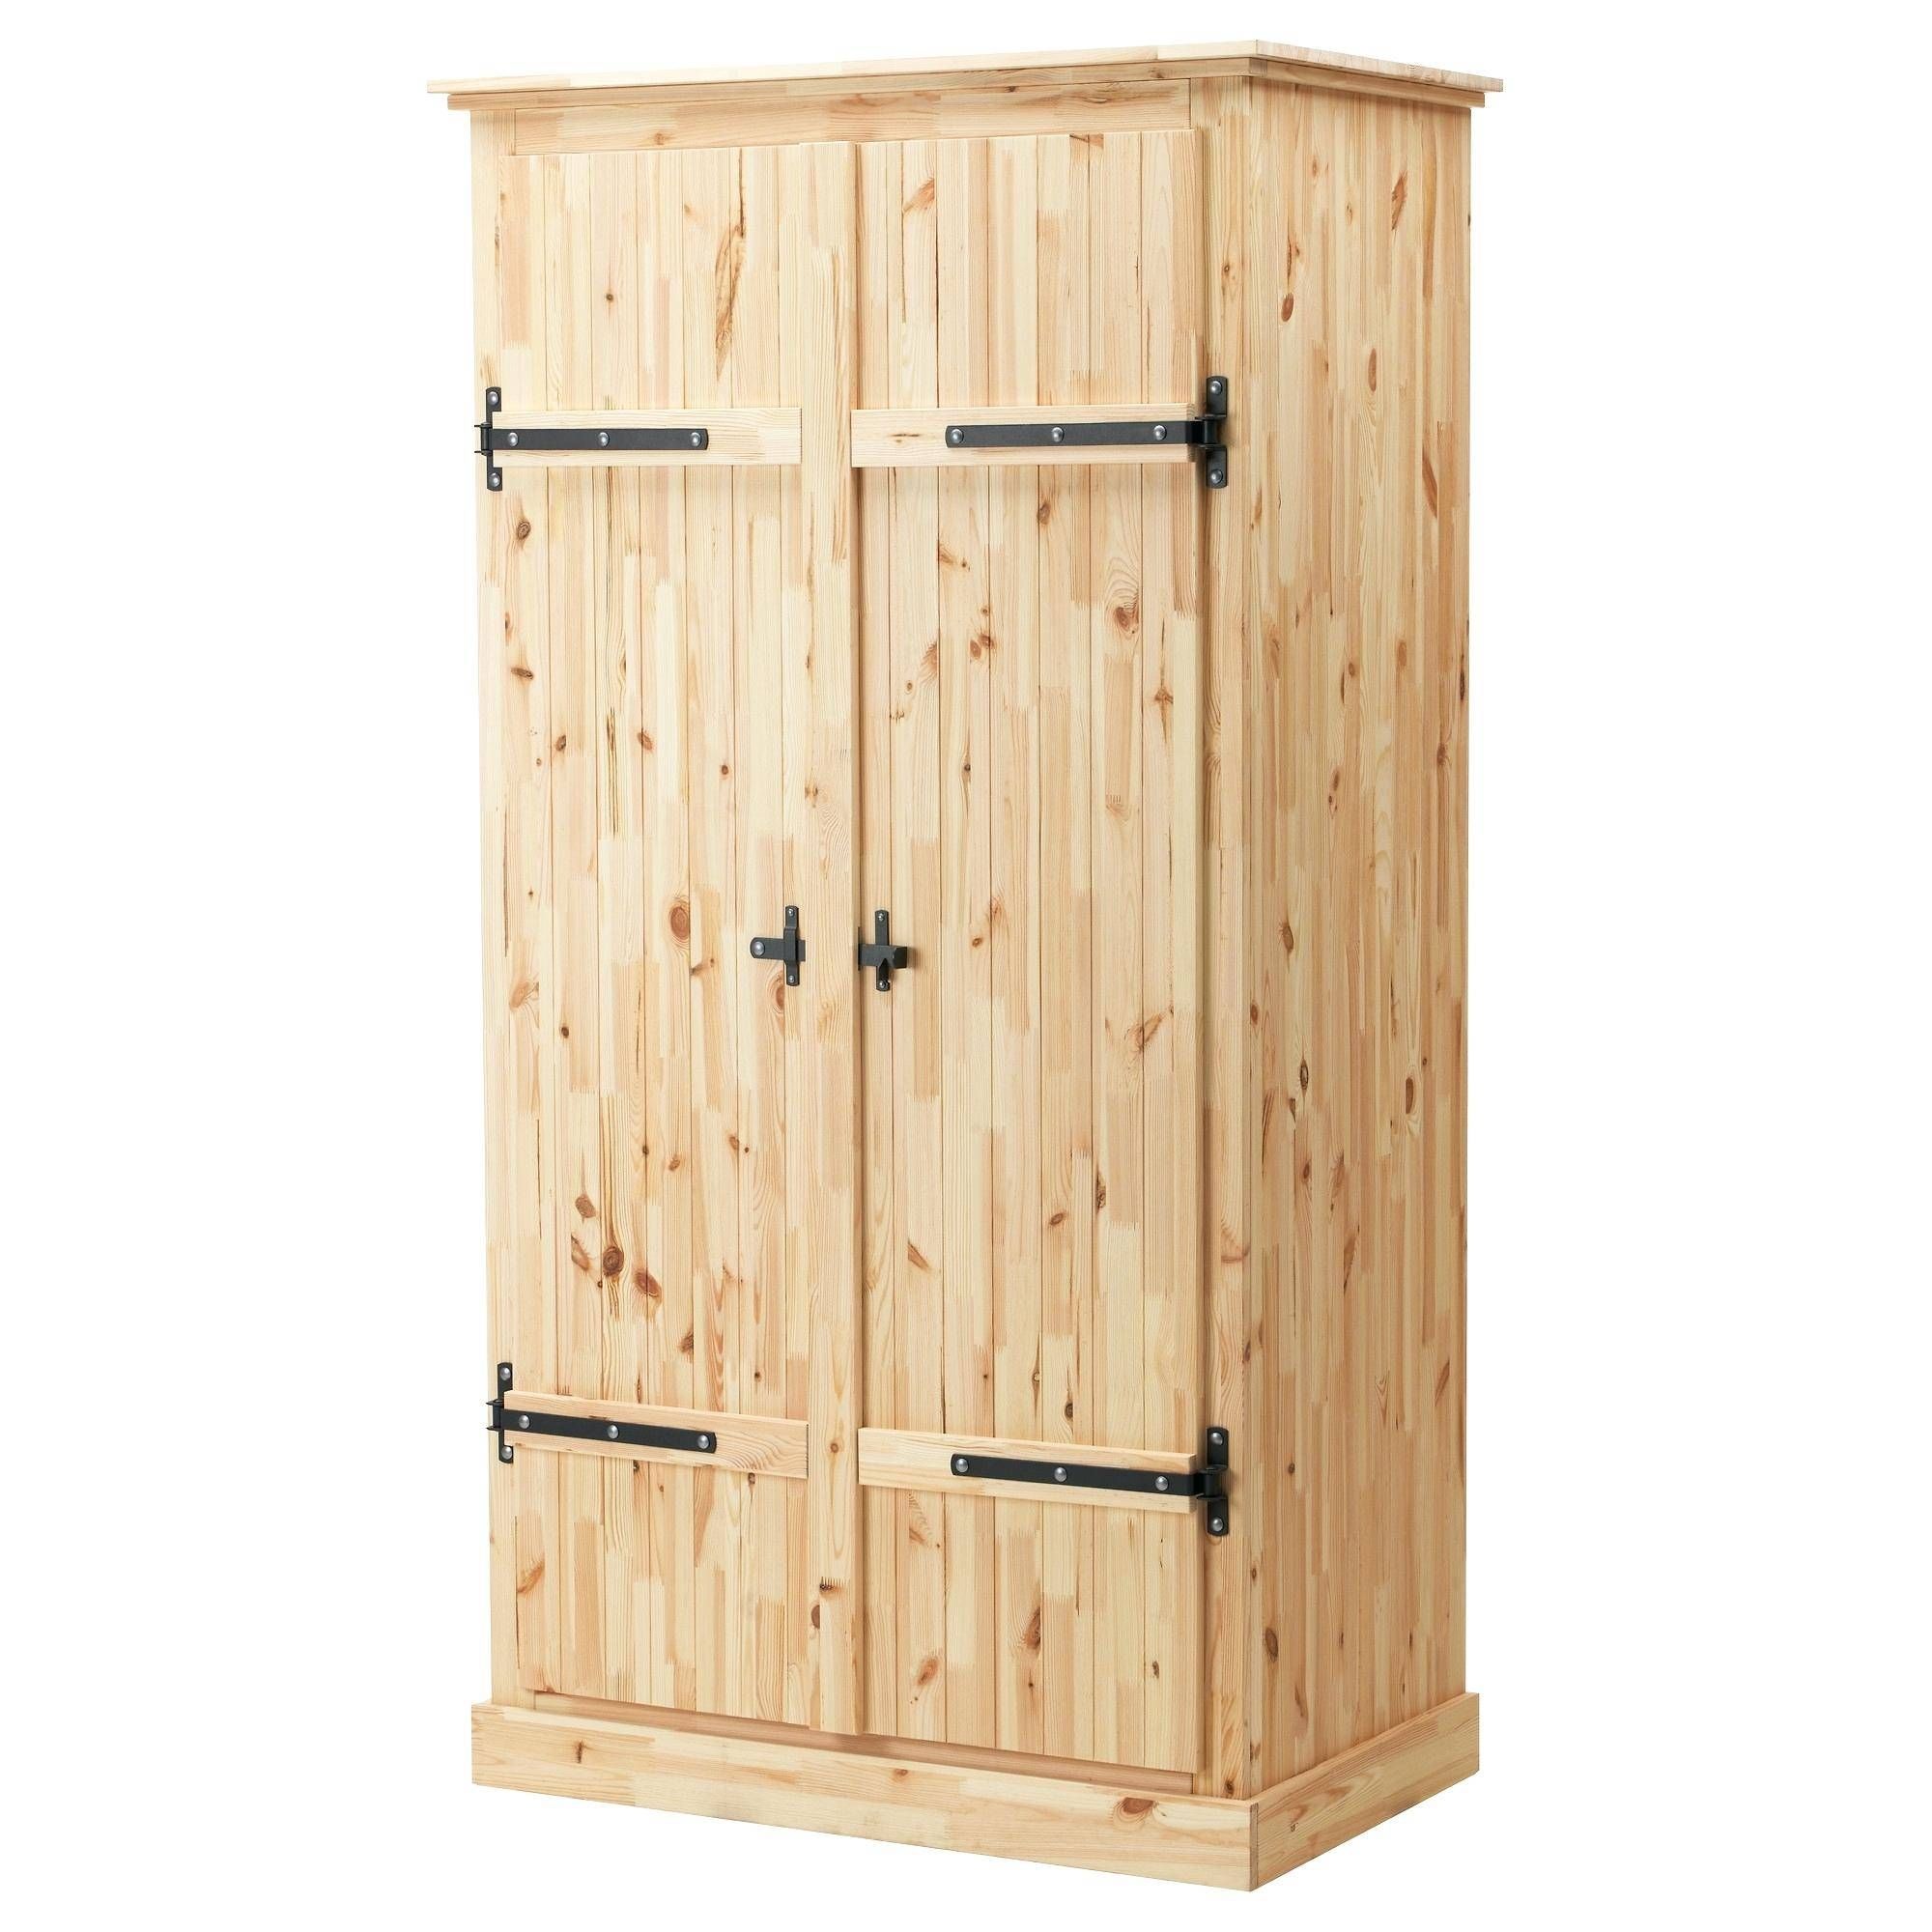 Wicker Armoire Wardrobe Ikea Closets While Nicoles Closet Is Light Regarding Wicker Armoire Wardrobes (View 7 of 15)